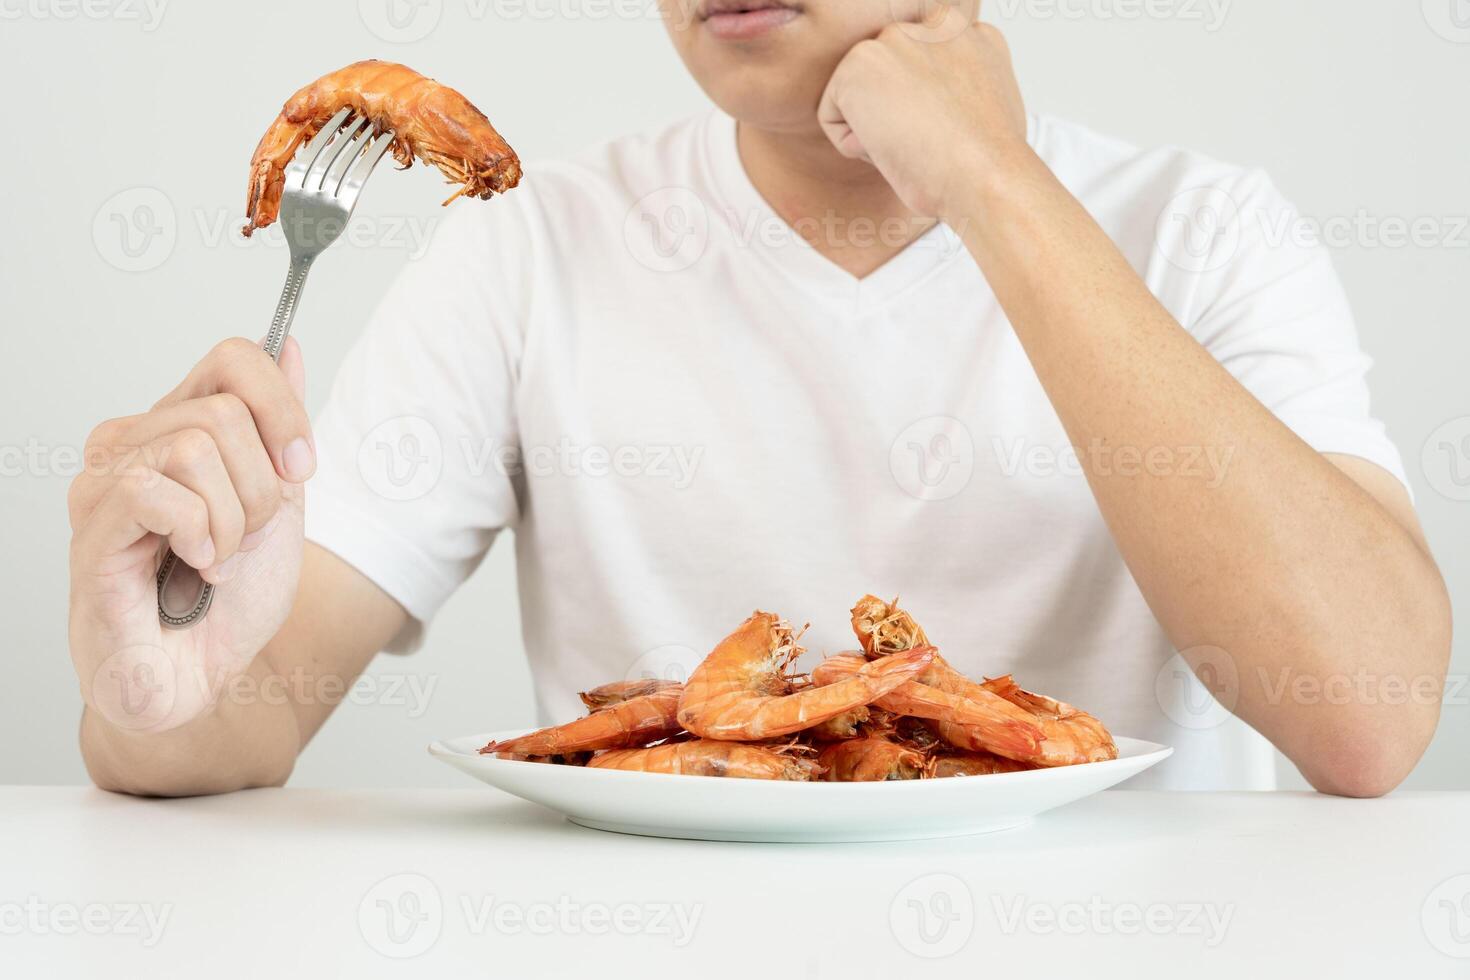 food allergies, men have reactions itching and redness after eating shrimp, seafood allergy, itching, rash, abdominal pain, diarrhea, chest tightness, unconsciousness, death, severe avoid allergies photo